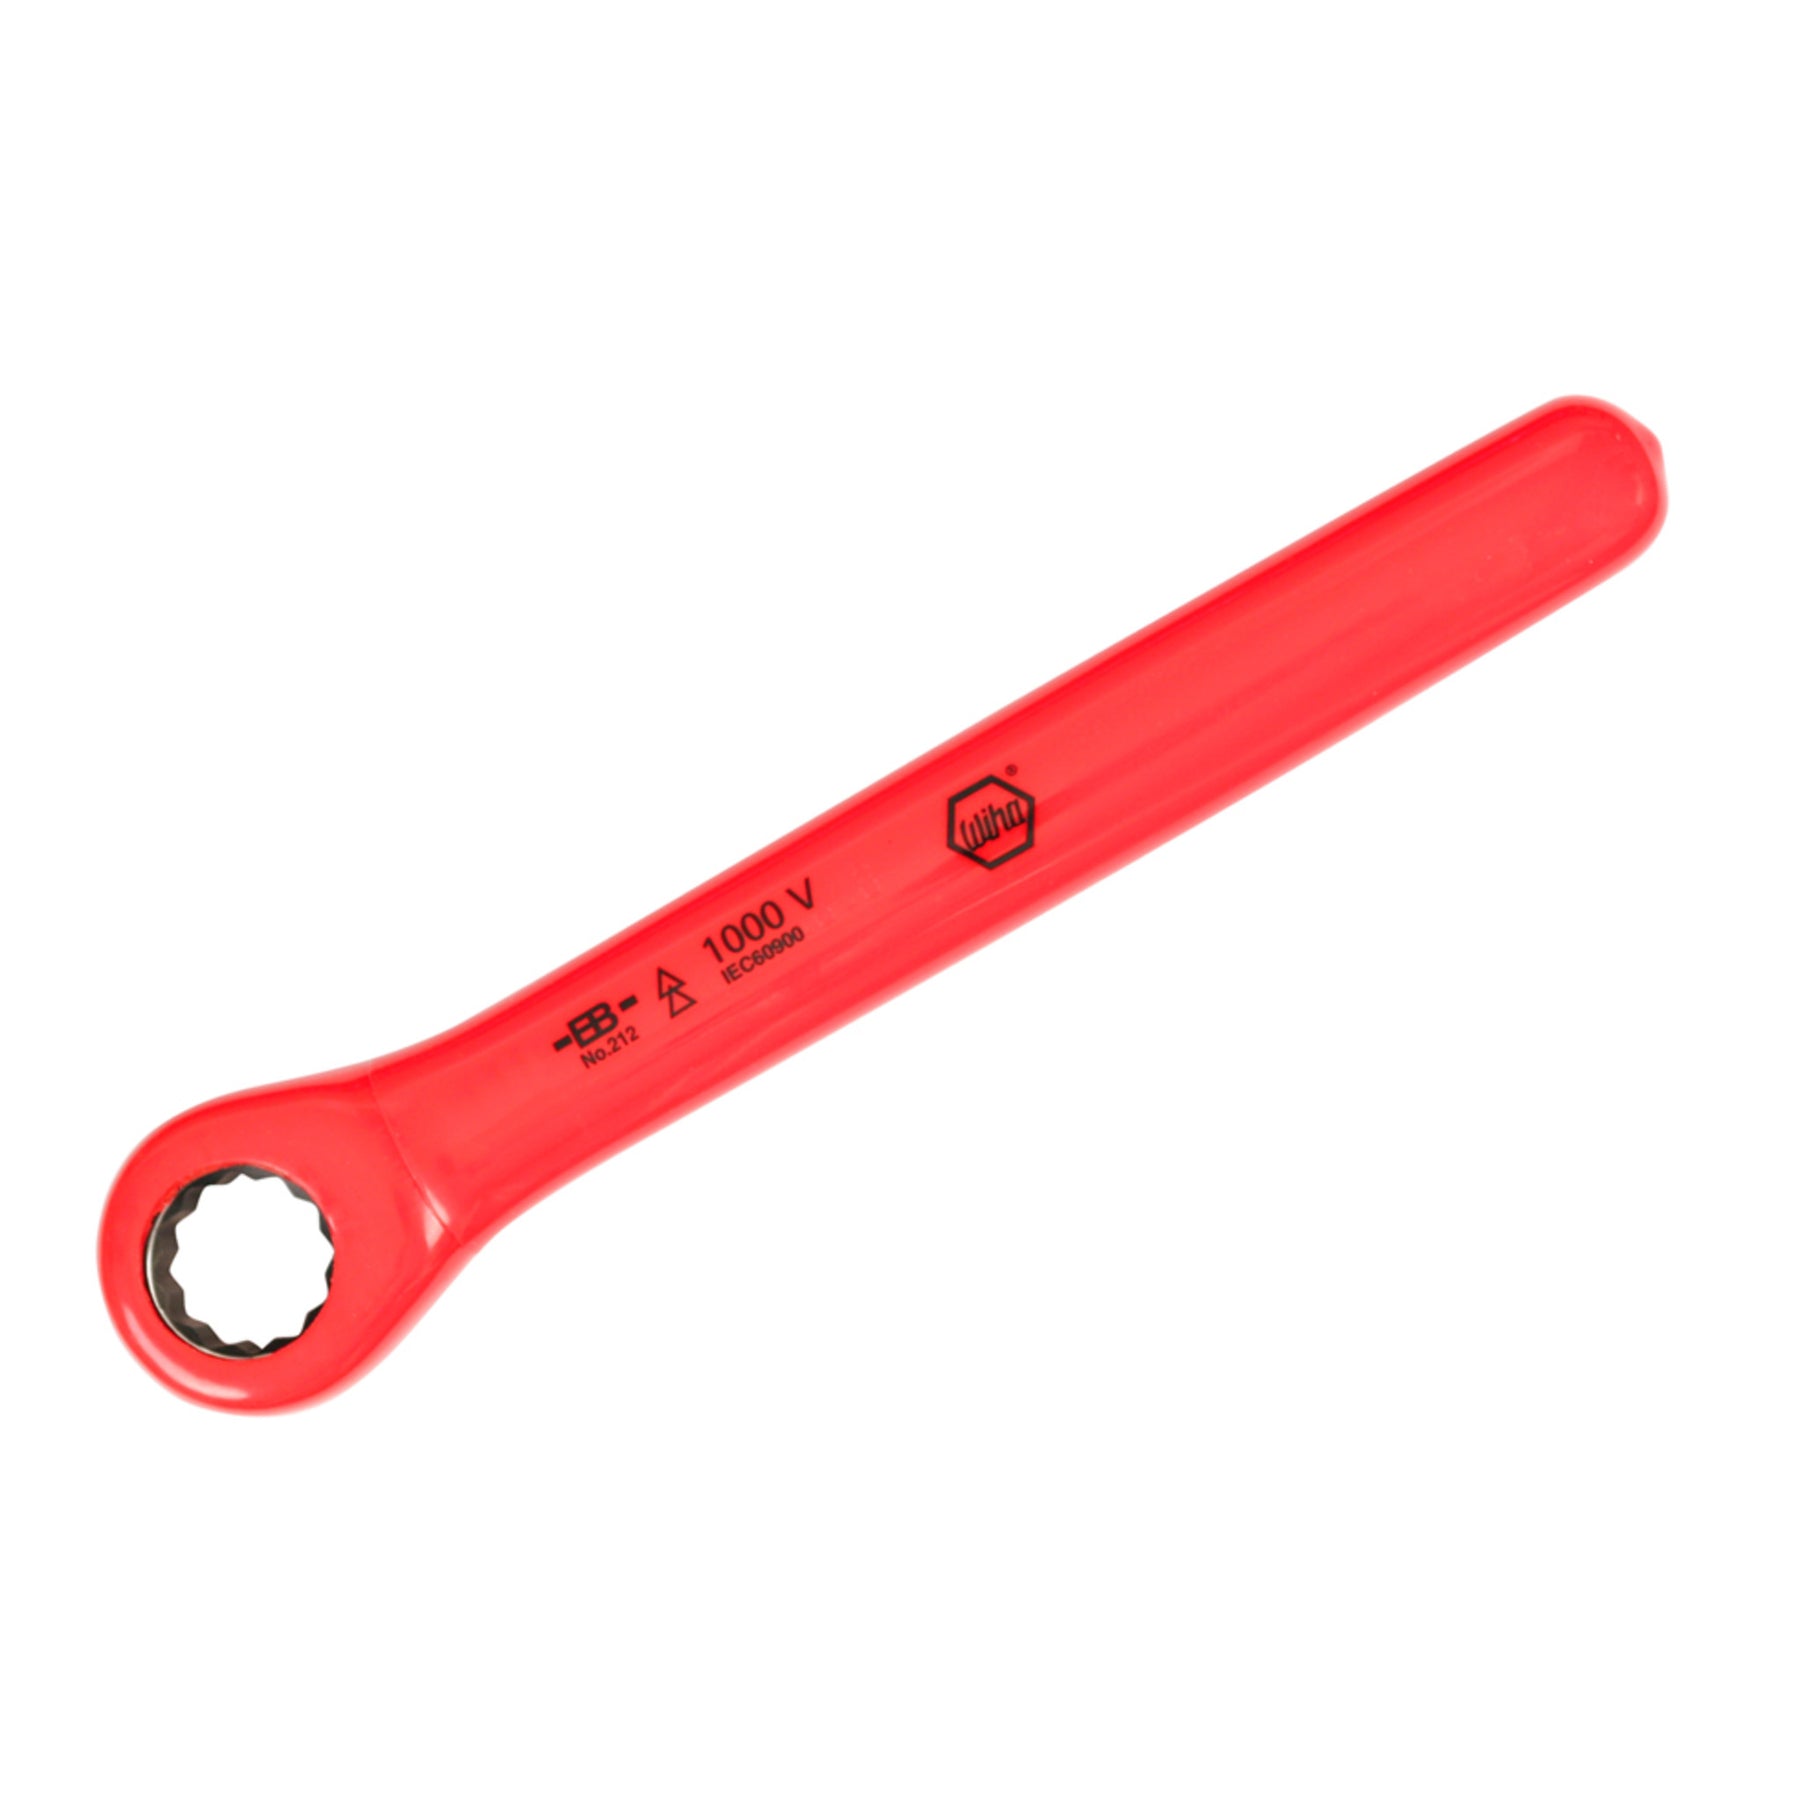 Insulated Ratchet Wrench 9/16"